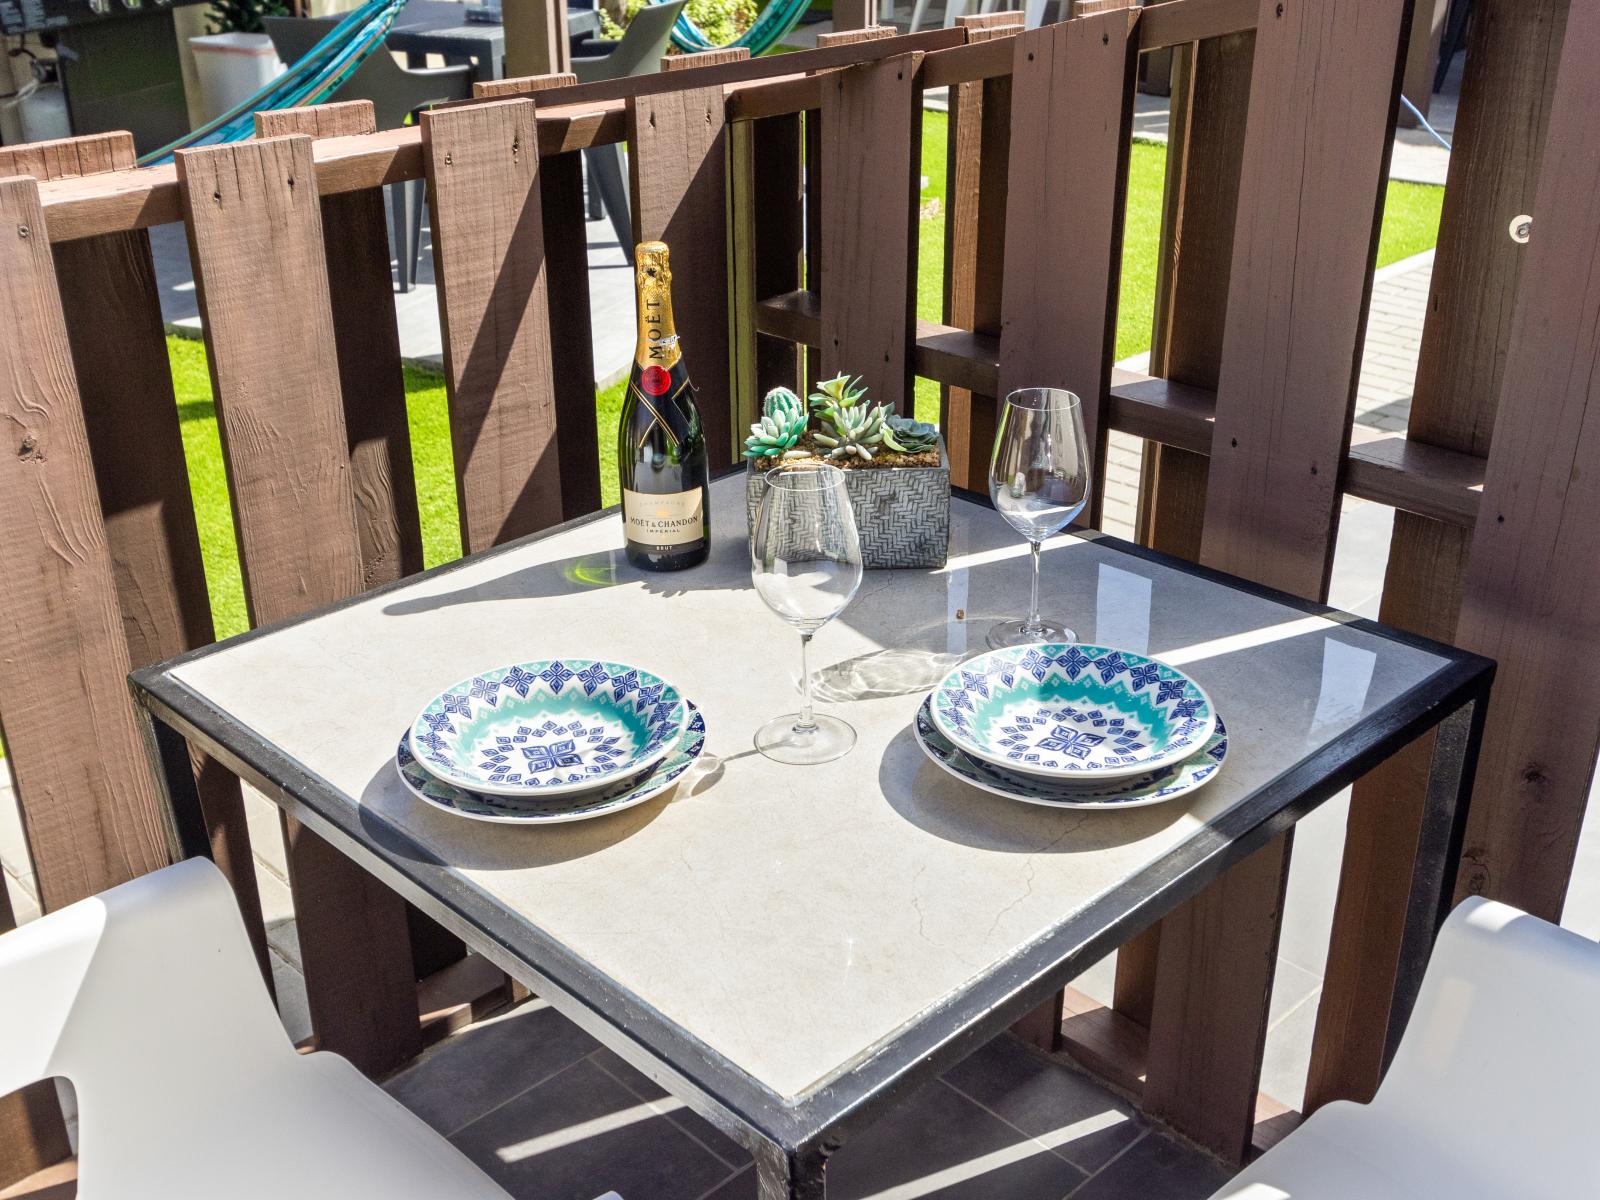 Elite outdoor dinning area of the apartment in Noord, Aruba - Beautiful 2 persons dinning - Majestically decored space with refreshing Atmosphere - Superbly sunbathed space - Outstanding pool facing dinning area - Beautiful views